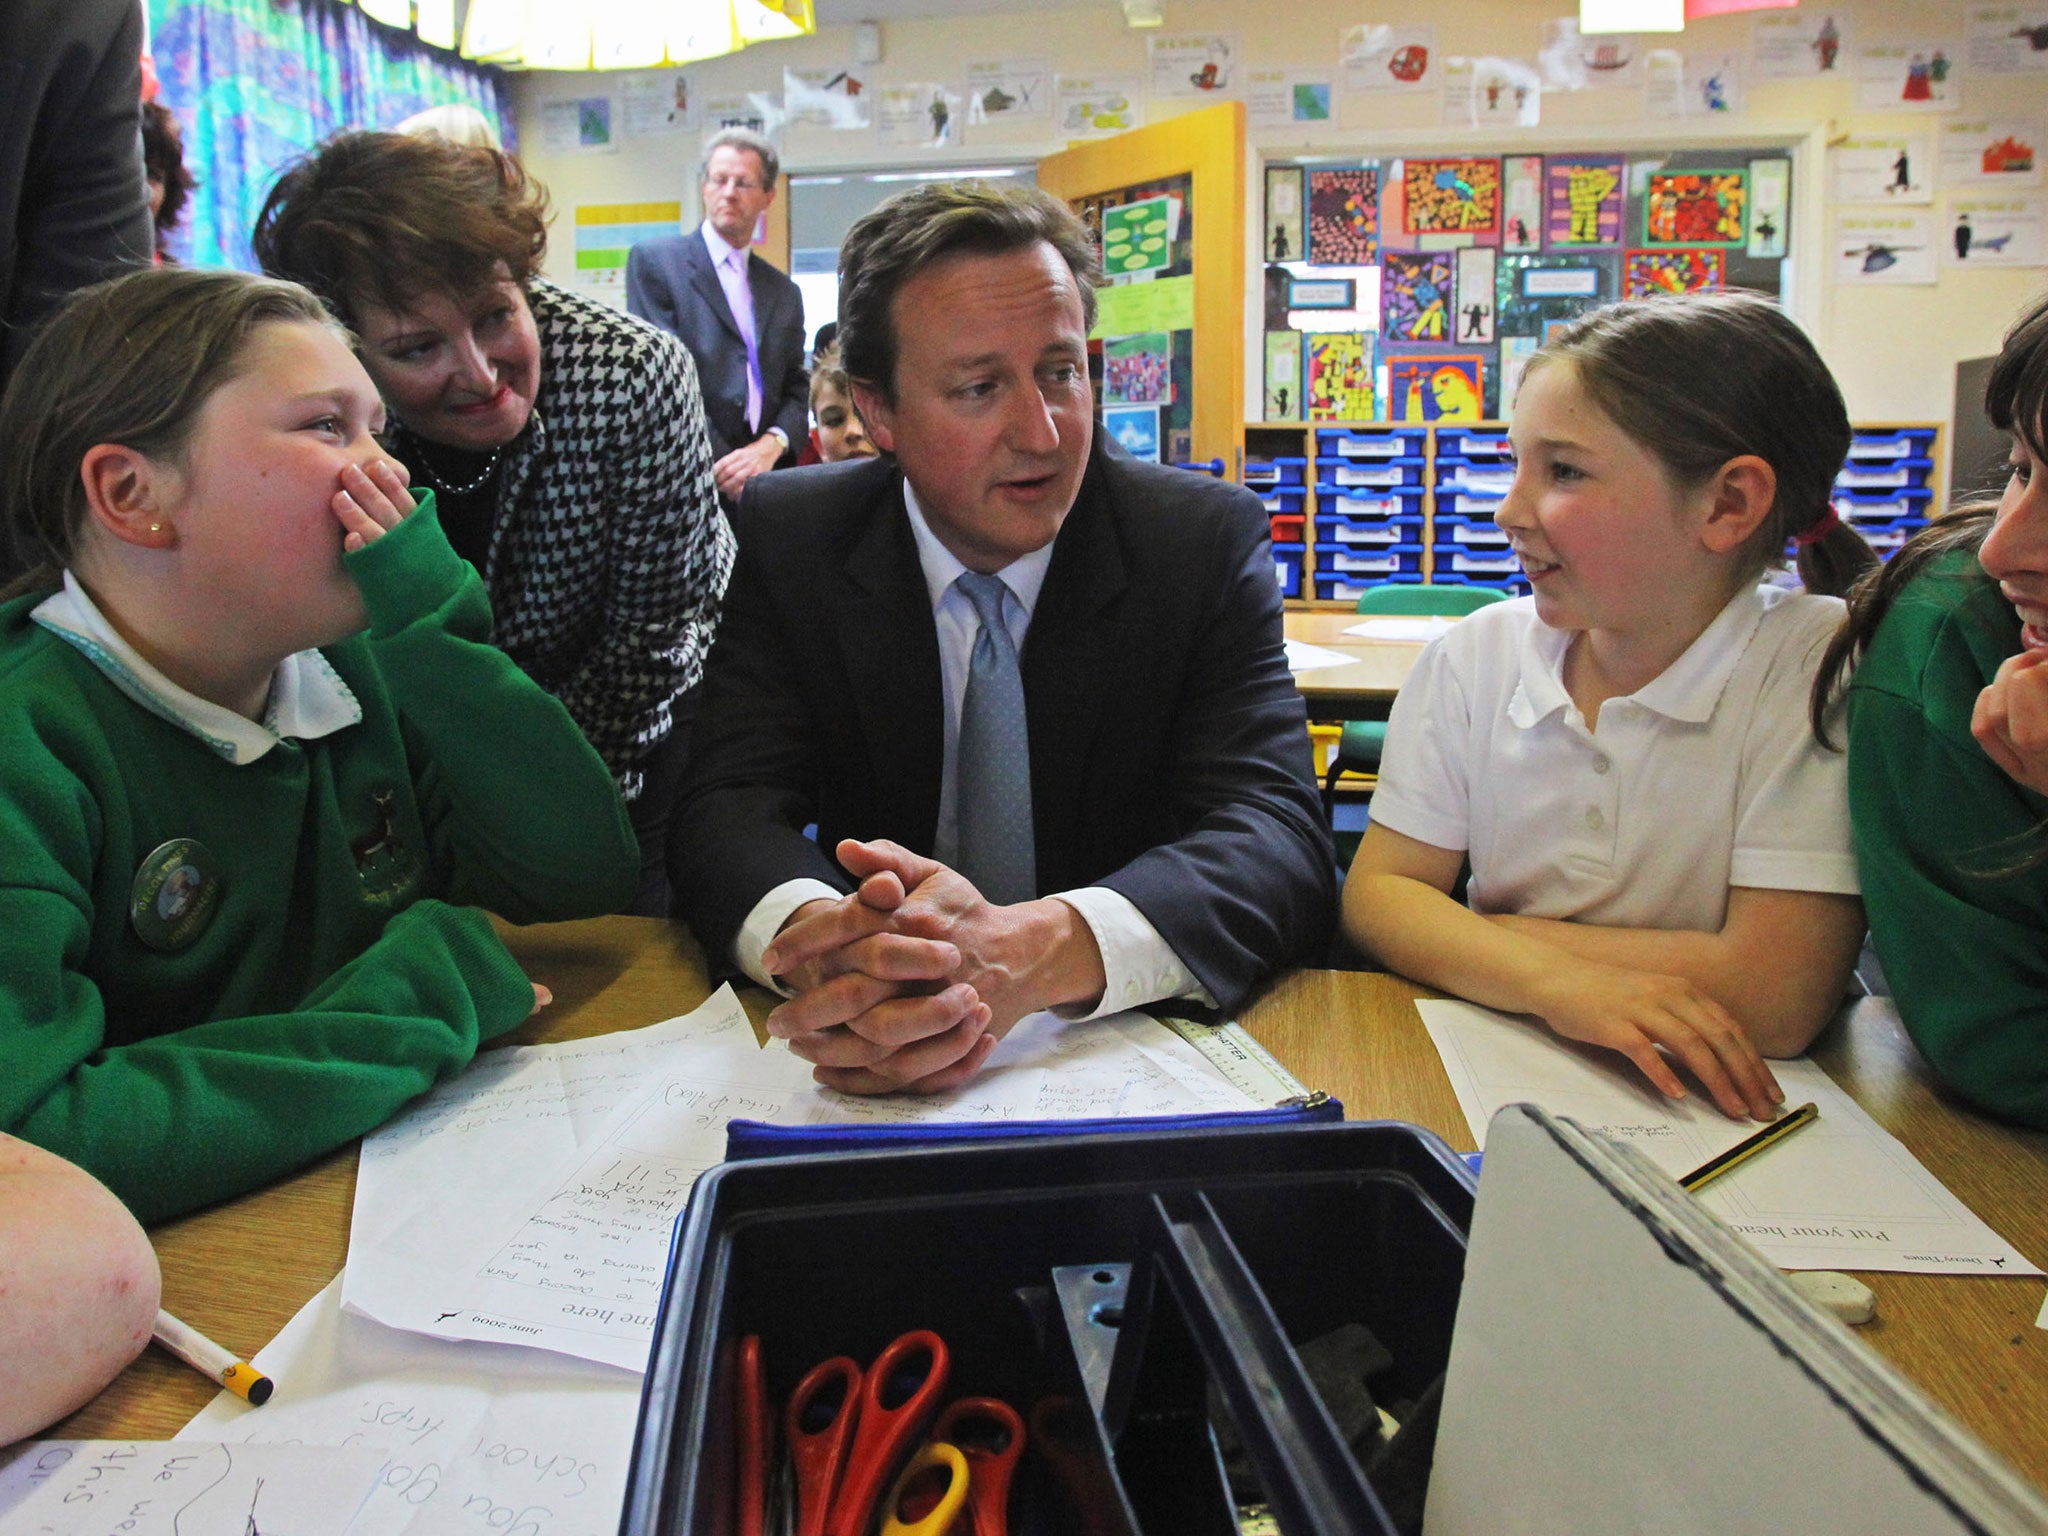 David Cameron's government wanted to abolish the requirement to measure child poverty in relation to household income